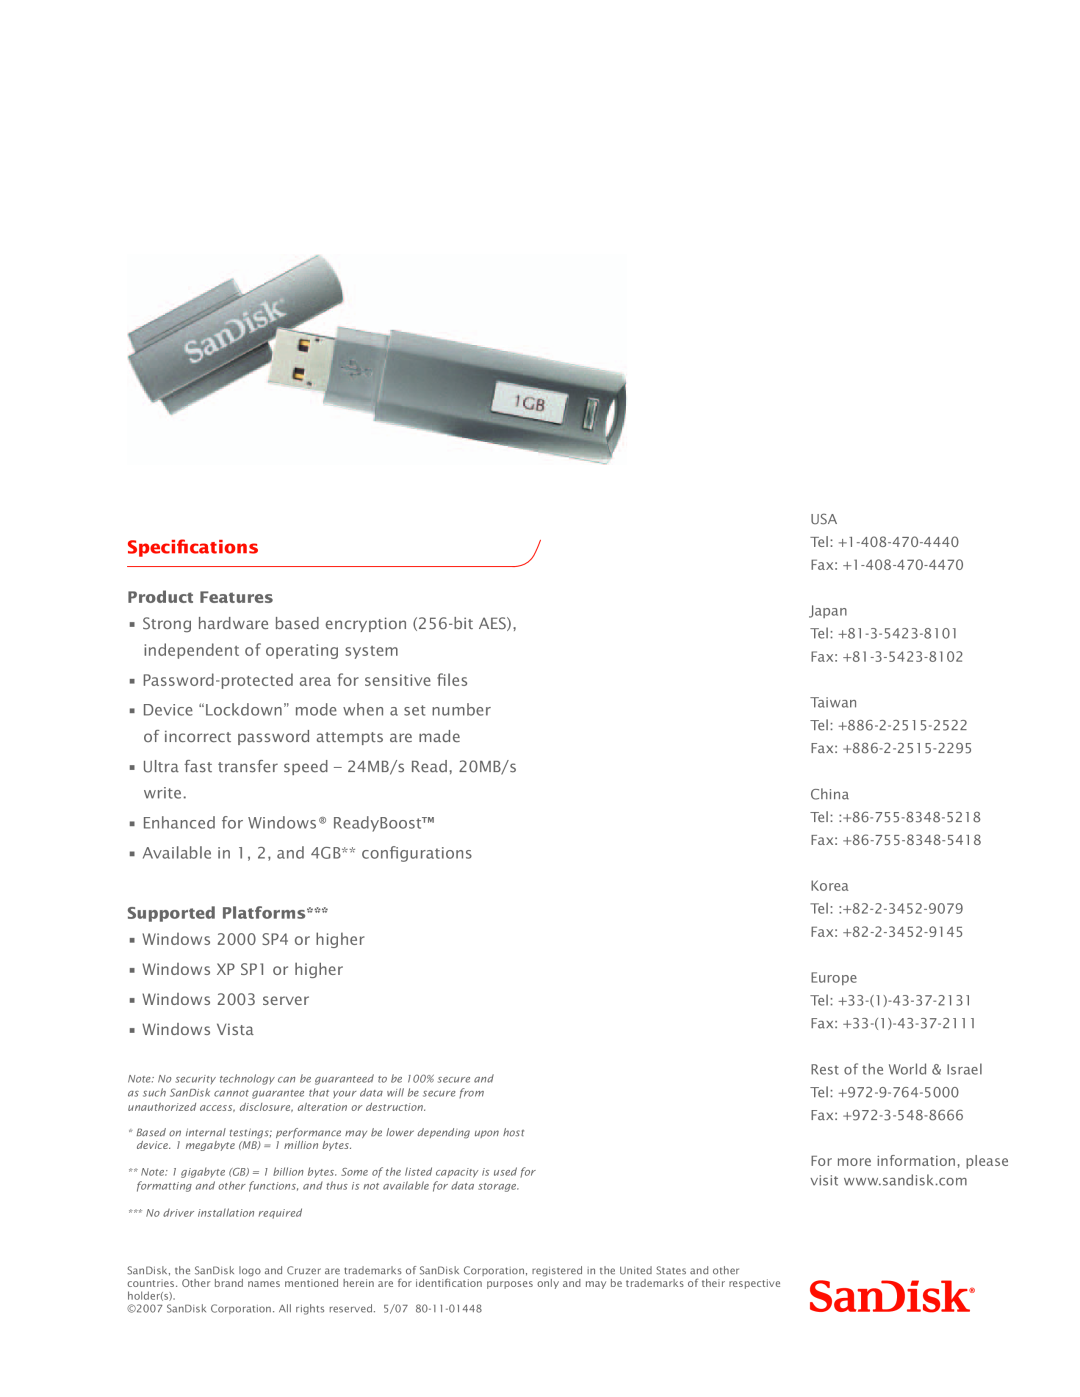 SanDisk Cruzer Professional manual Specifications, Product Features, Supported Platforms, Fax +972-3-548-8666 